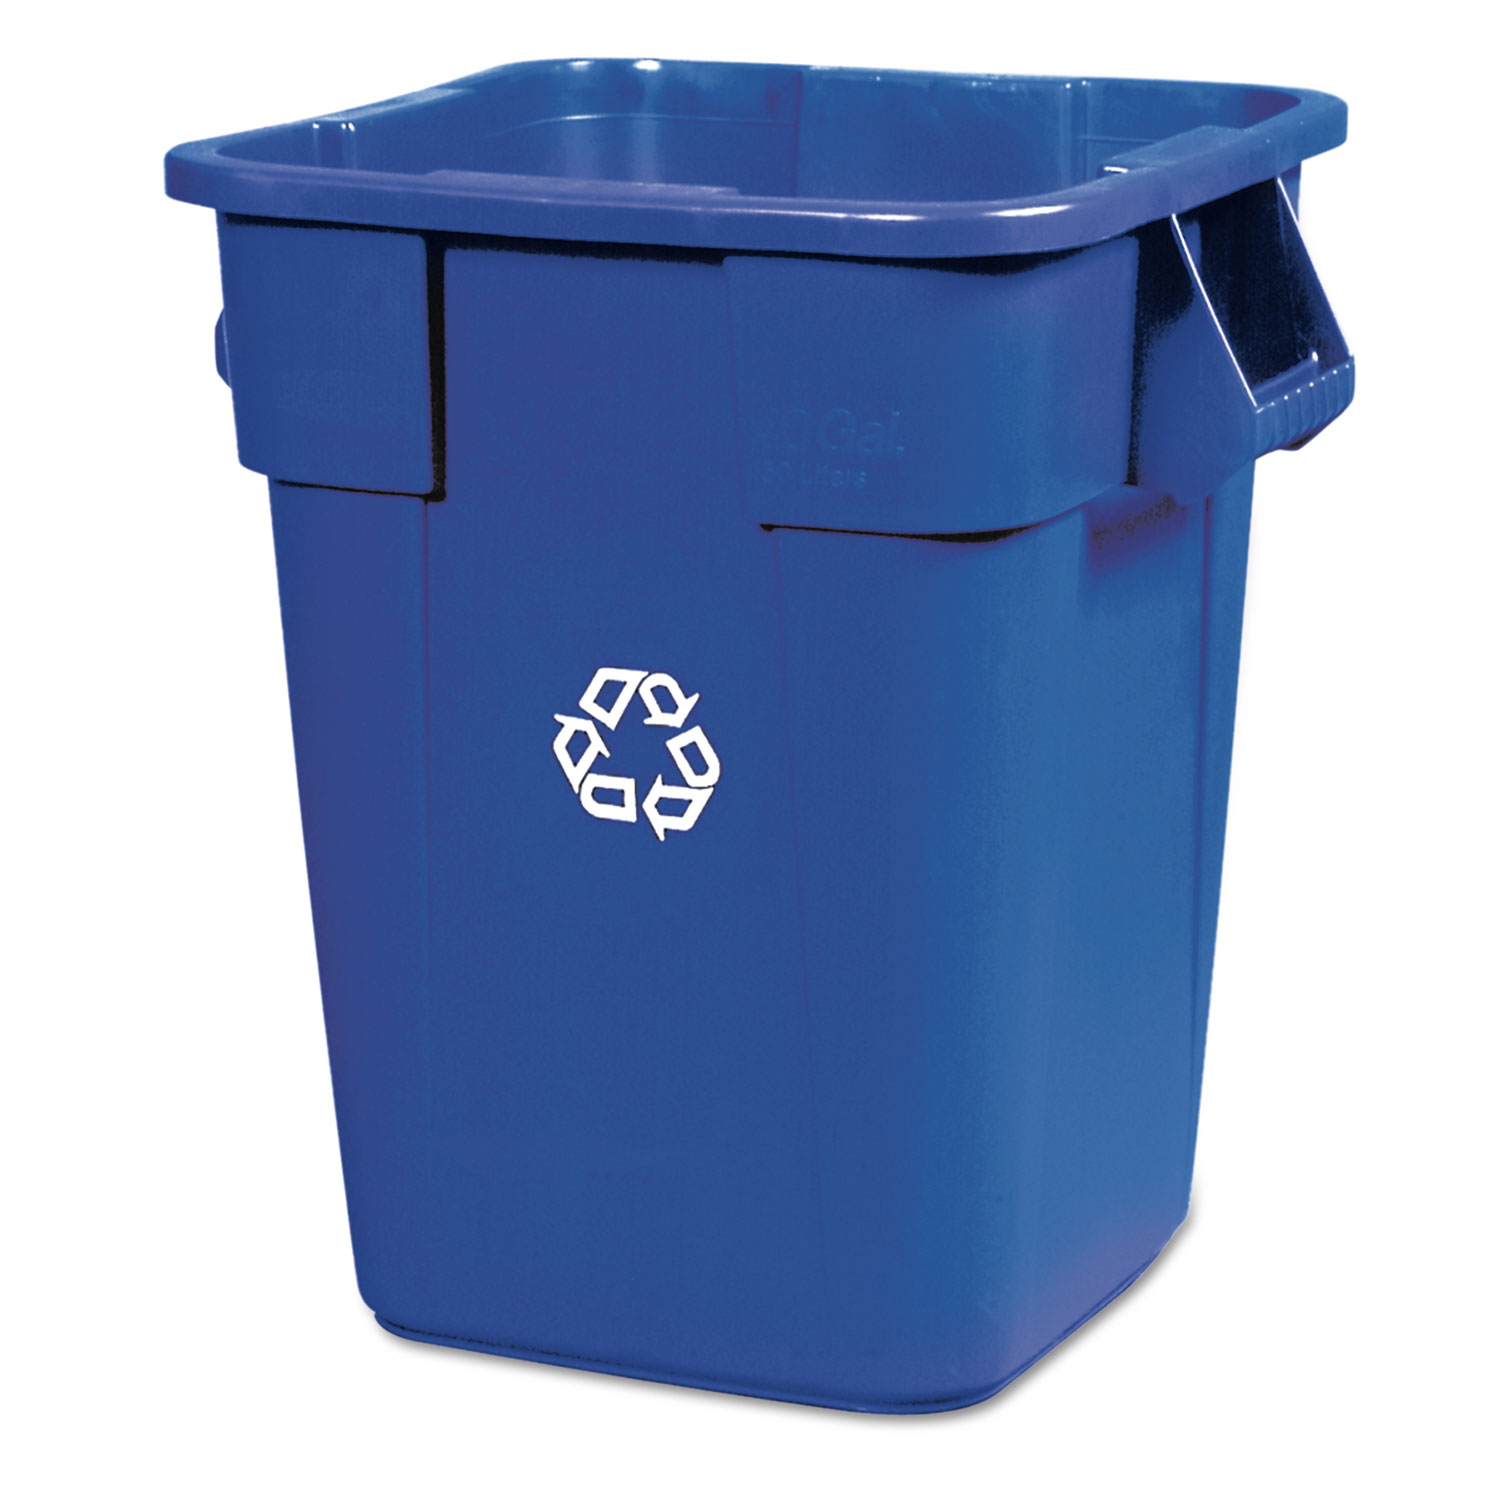 Brute Recycling Container, Square, Polyethylene, 40 gal, Blue